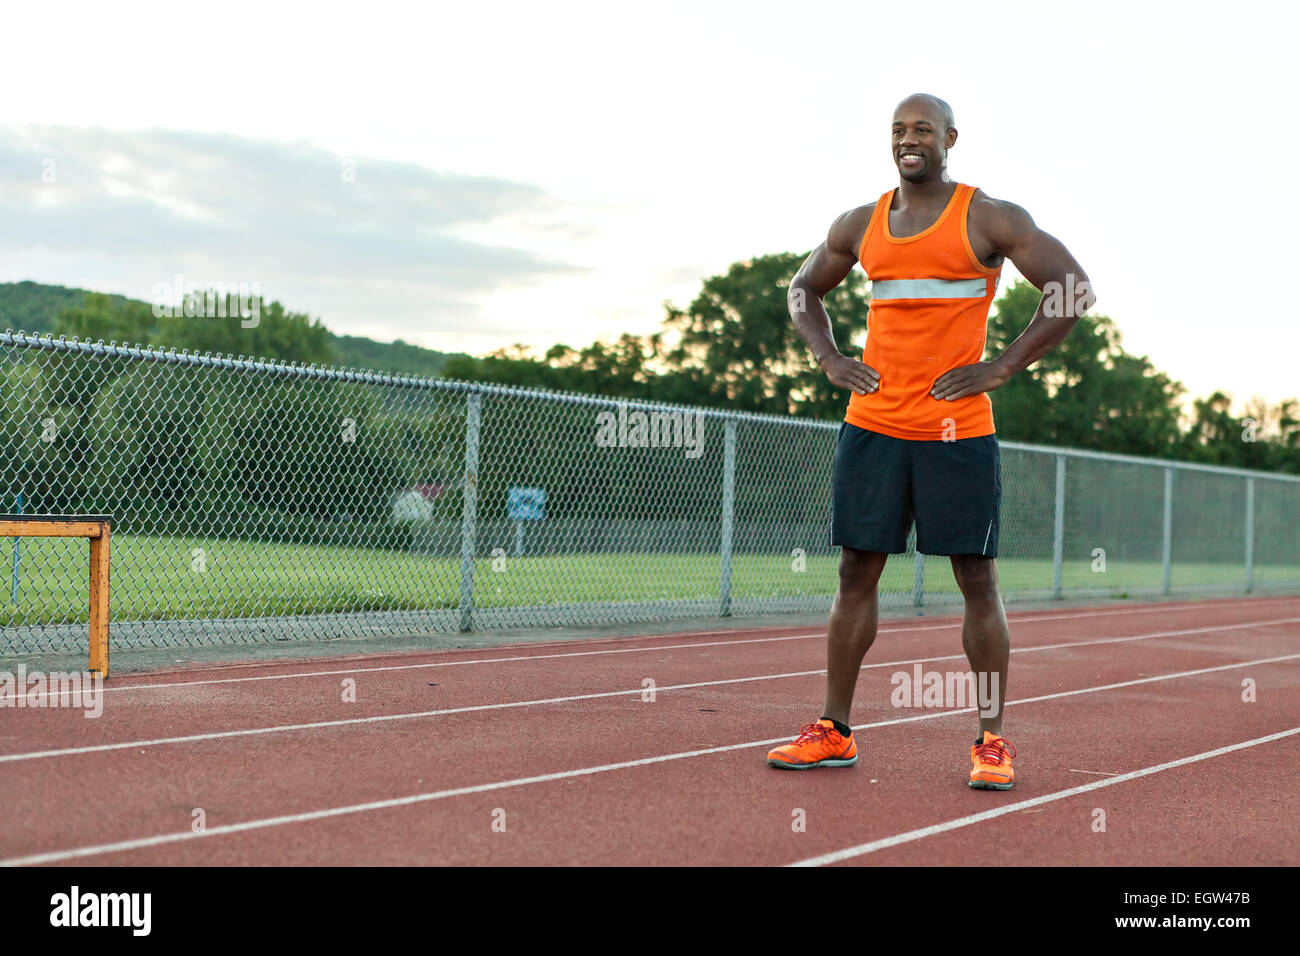 Track and Field Runner Smiling Stock Photo